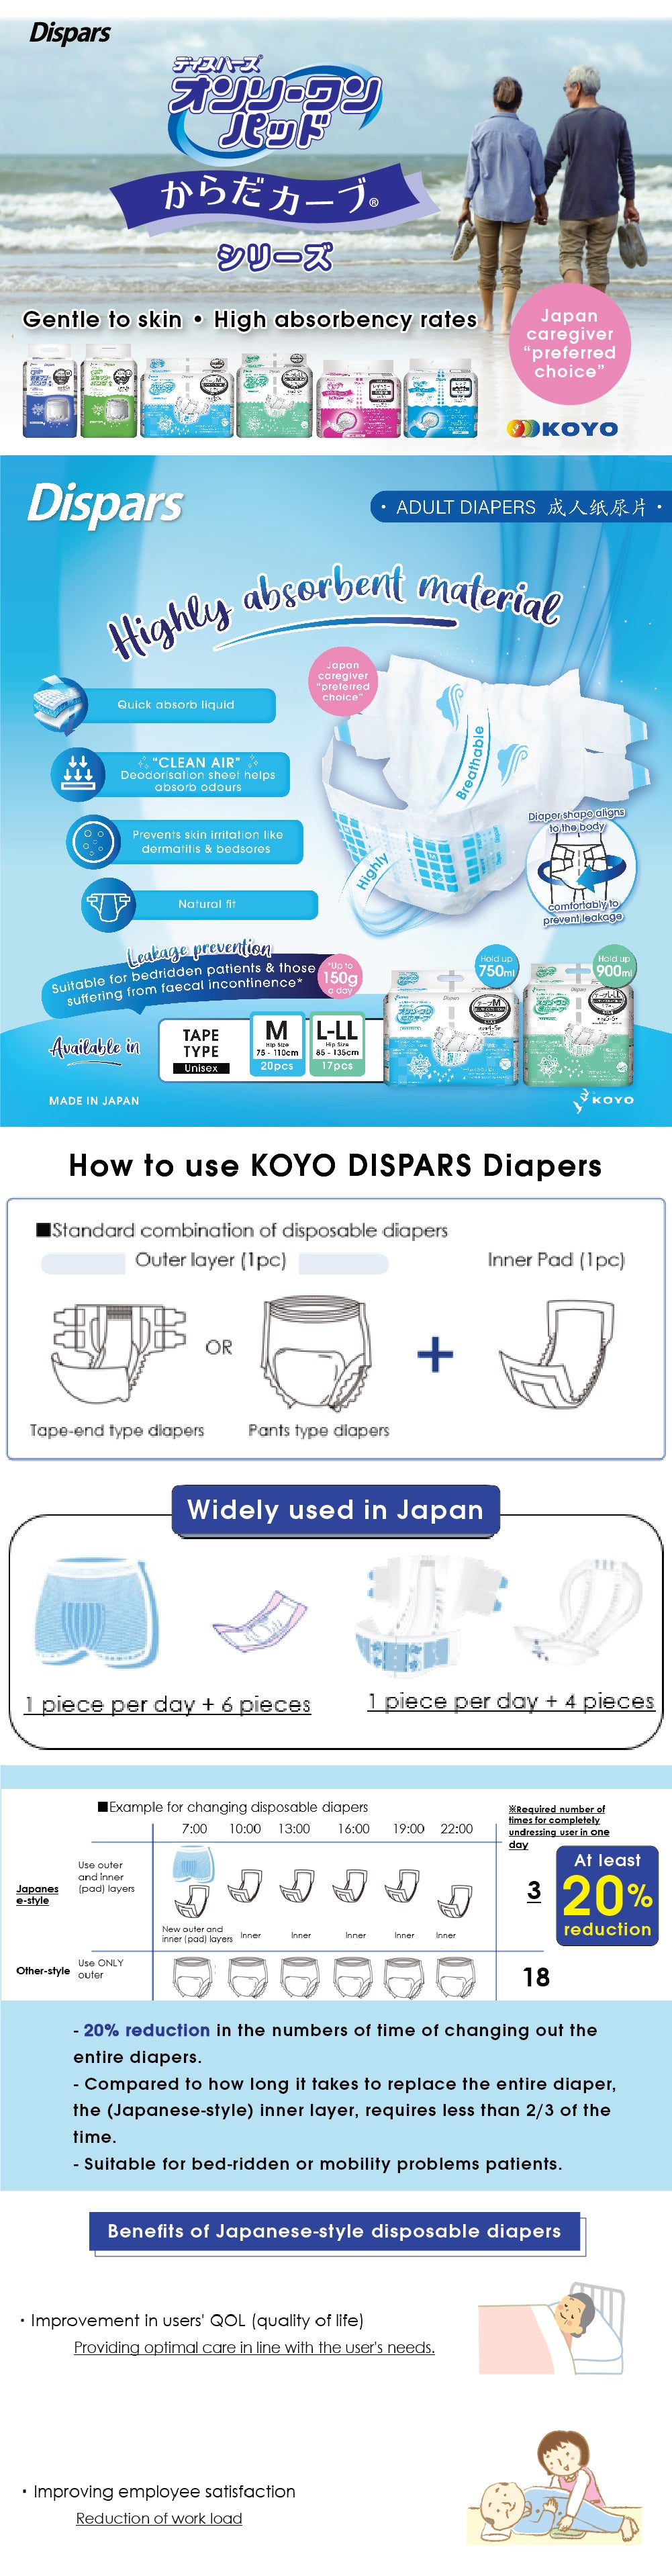 Dispars Only One Unisex Adult Tape Diapers Carton Pack (L-LL Size) 【4x17pcs per carton】